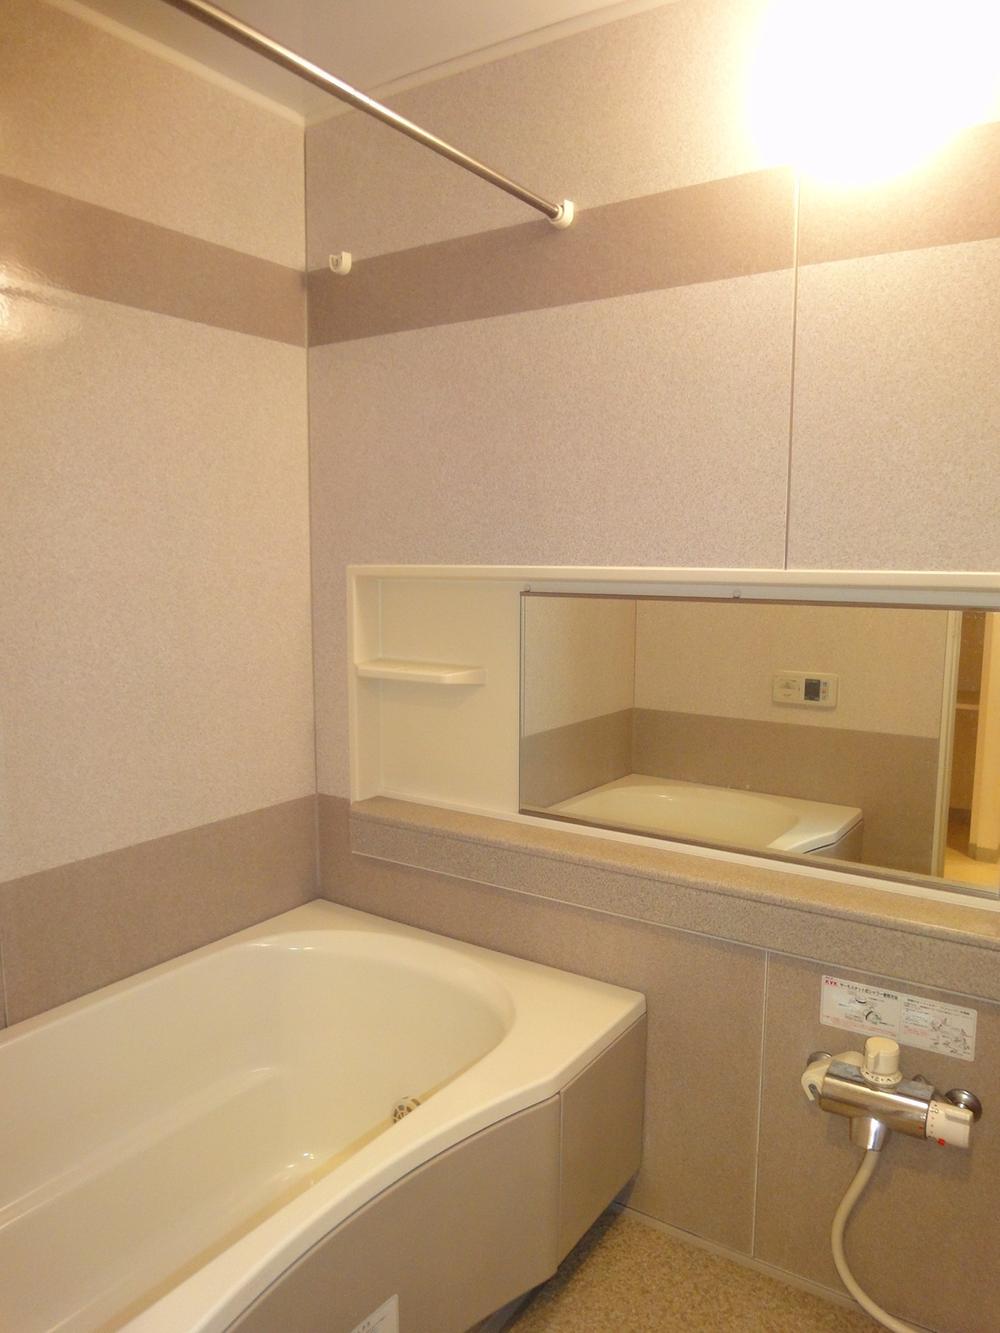 Bathroom. Additional heating function, Unit bus with ventilation dryer